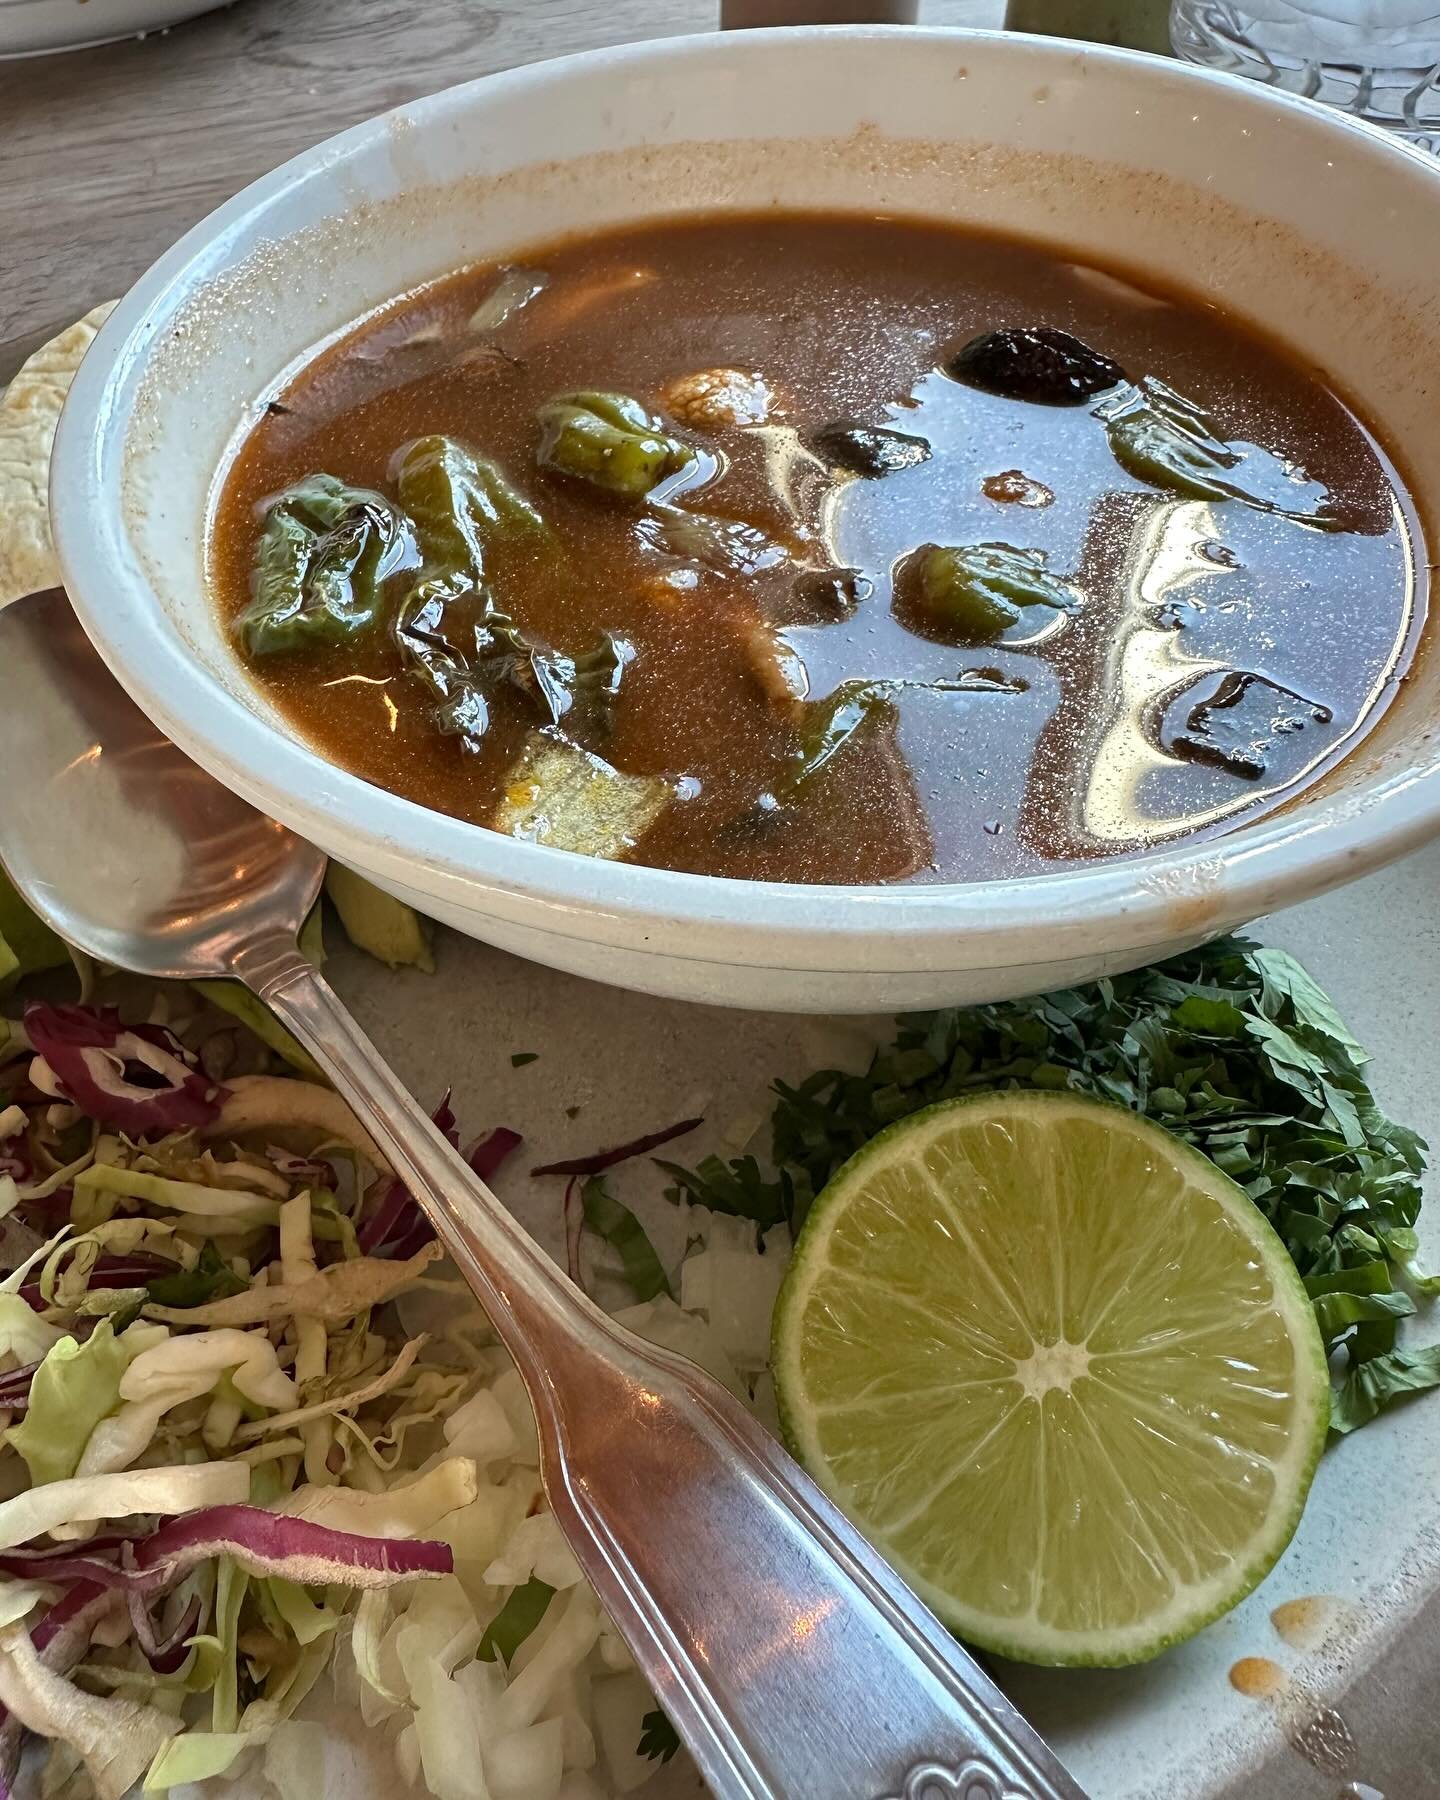 For me, when I find a vegetarian pazole on the menu, it was a &ldquo;must try it&rdquo; moment. Wowza! I loved it. 

It was full of flavor and tasted like a comfort food. This dish has carb, fiber, fat and protein ( even when served without meat).

#